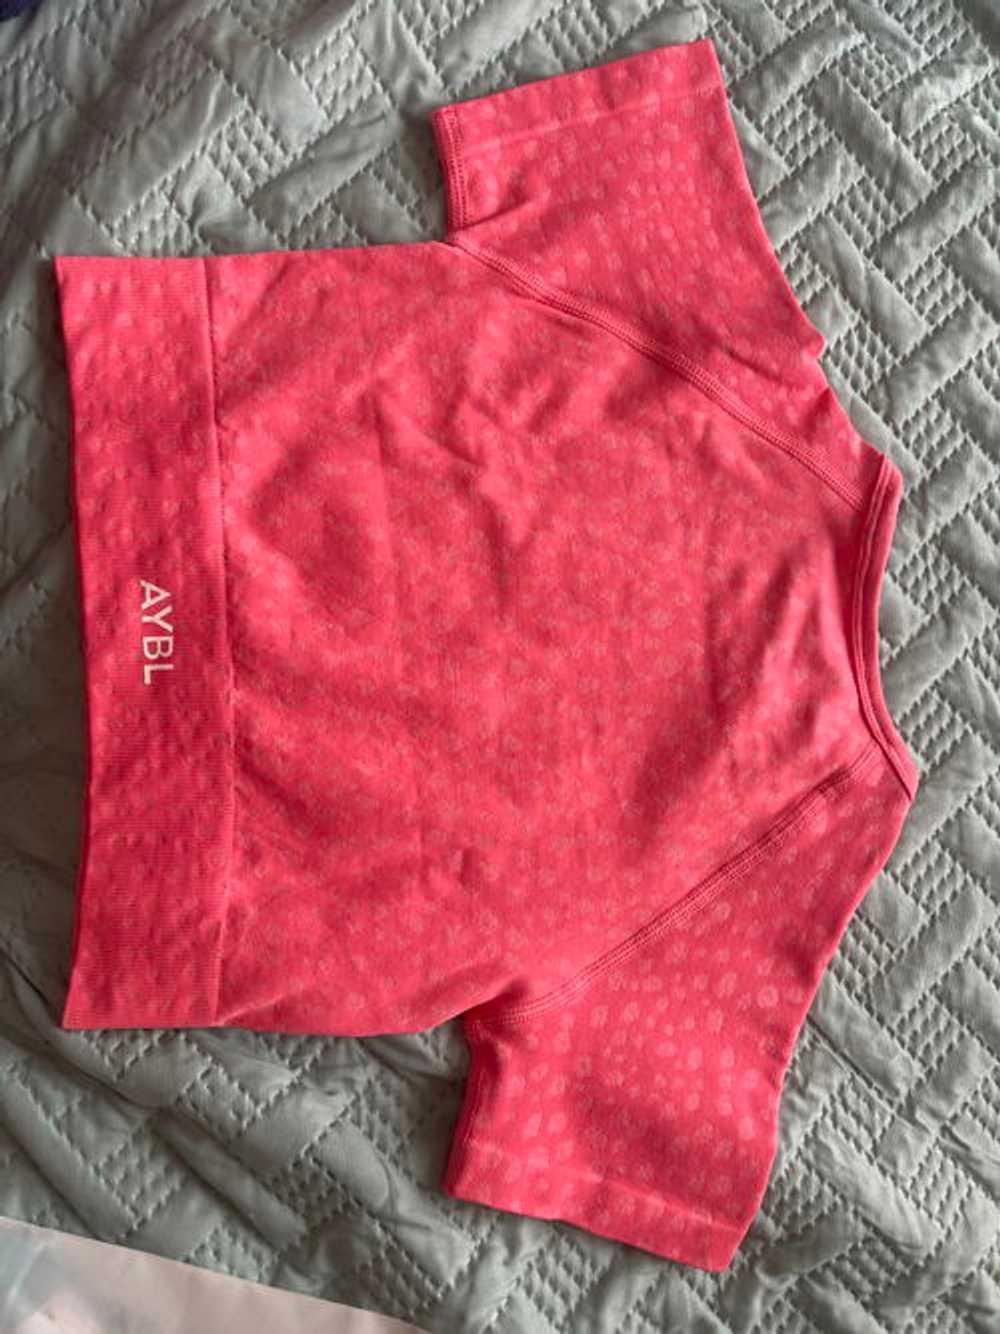 AYBL Evolve Speckle Seamless Crop Top - Coral Pink - image 5